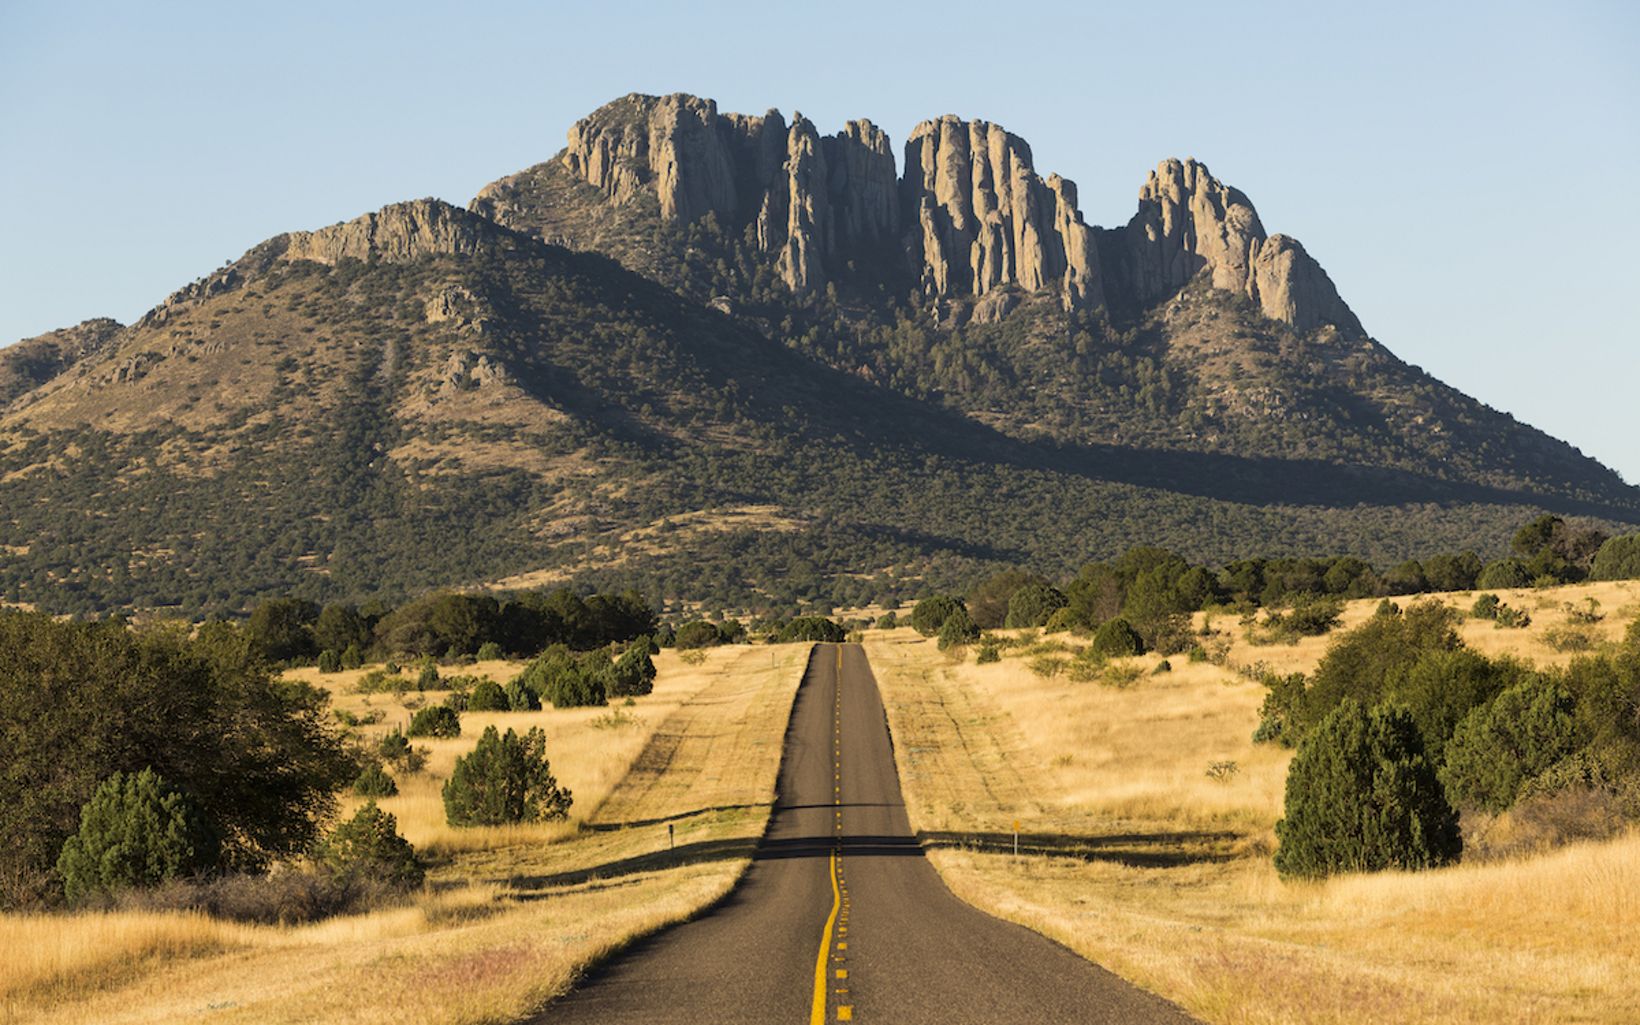 A road stretches in front of Sawtooth Mountain towering in the distance.